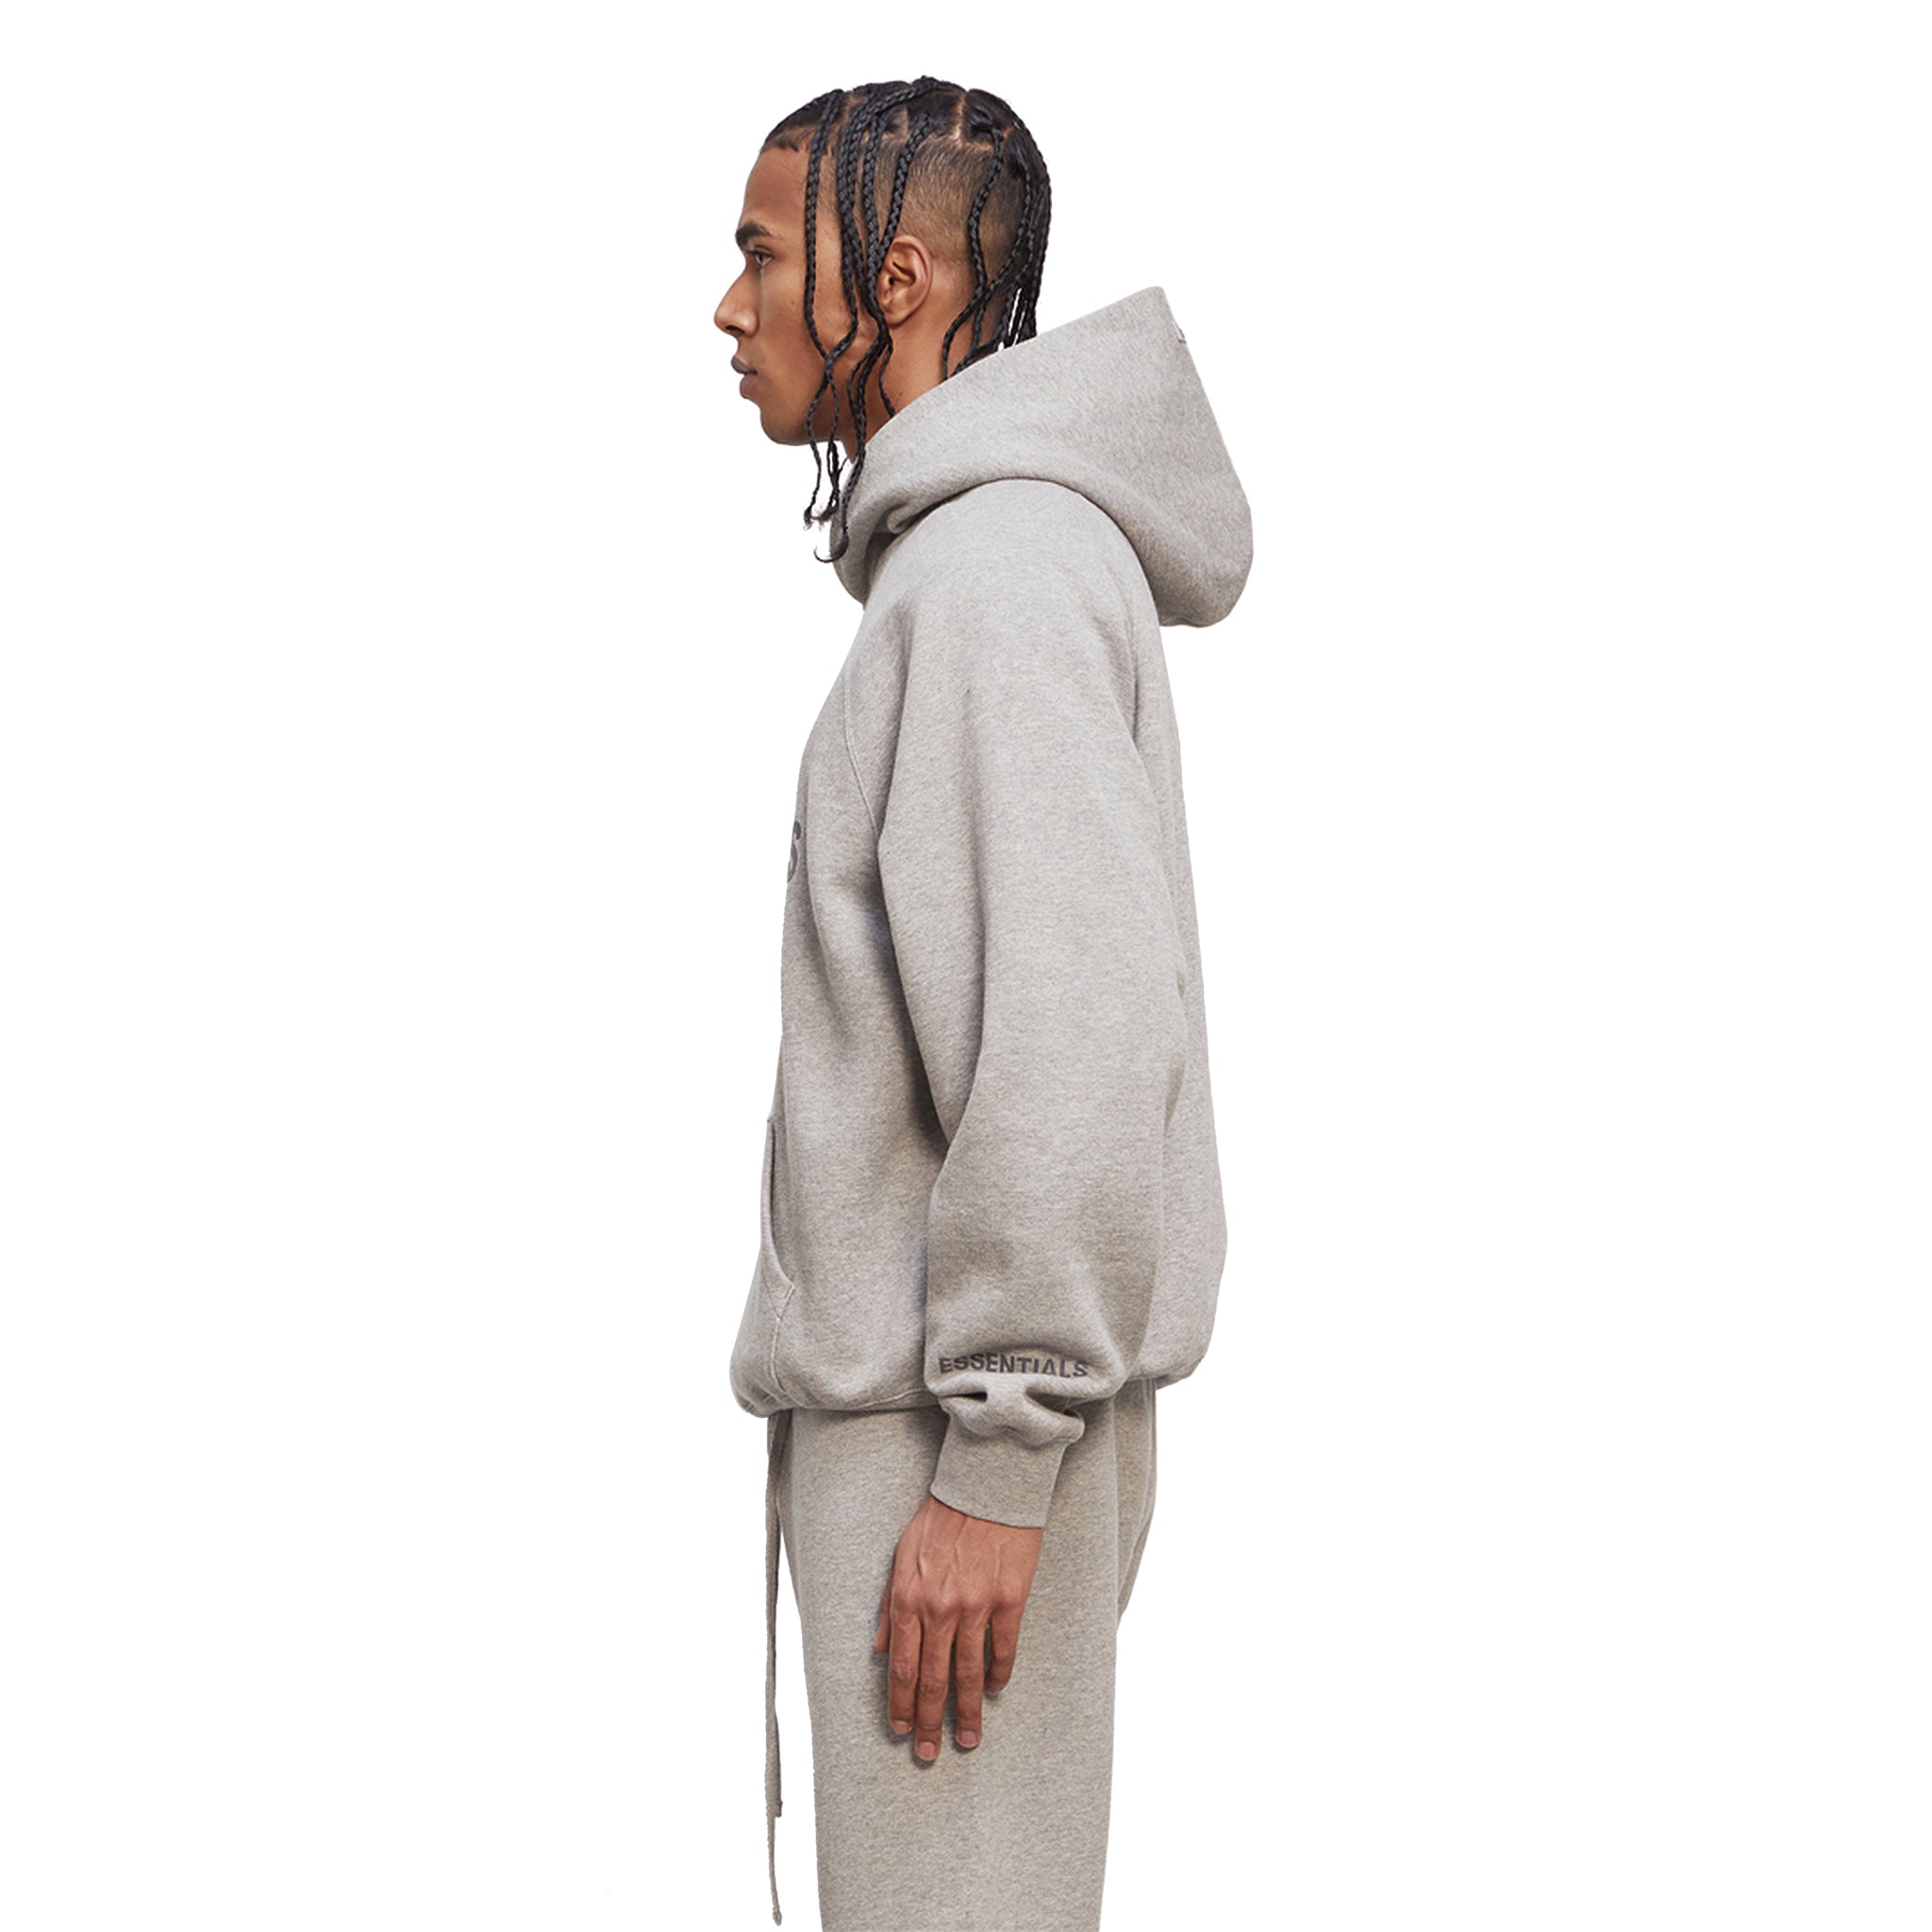 Model sid back view of Fear Of God Essentials Heather Oatmeal Hoodie